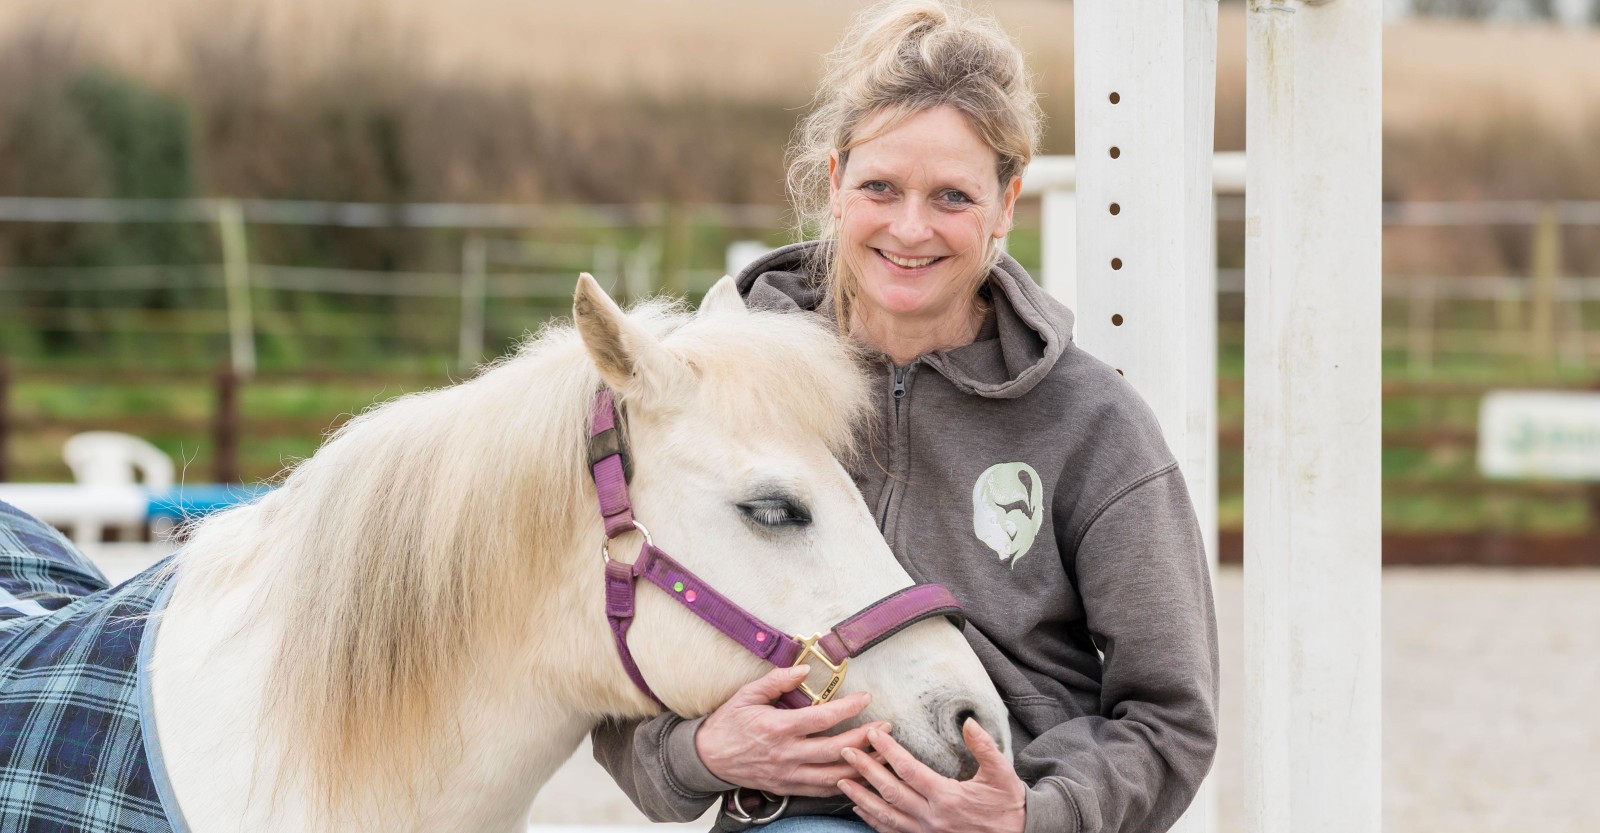 Lisa Deacon with horse -  business had support of a Start Up Loan from British Business Bank